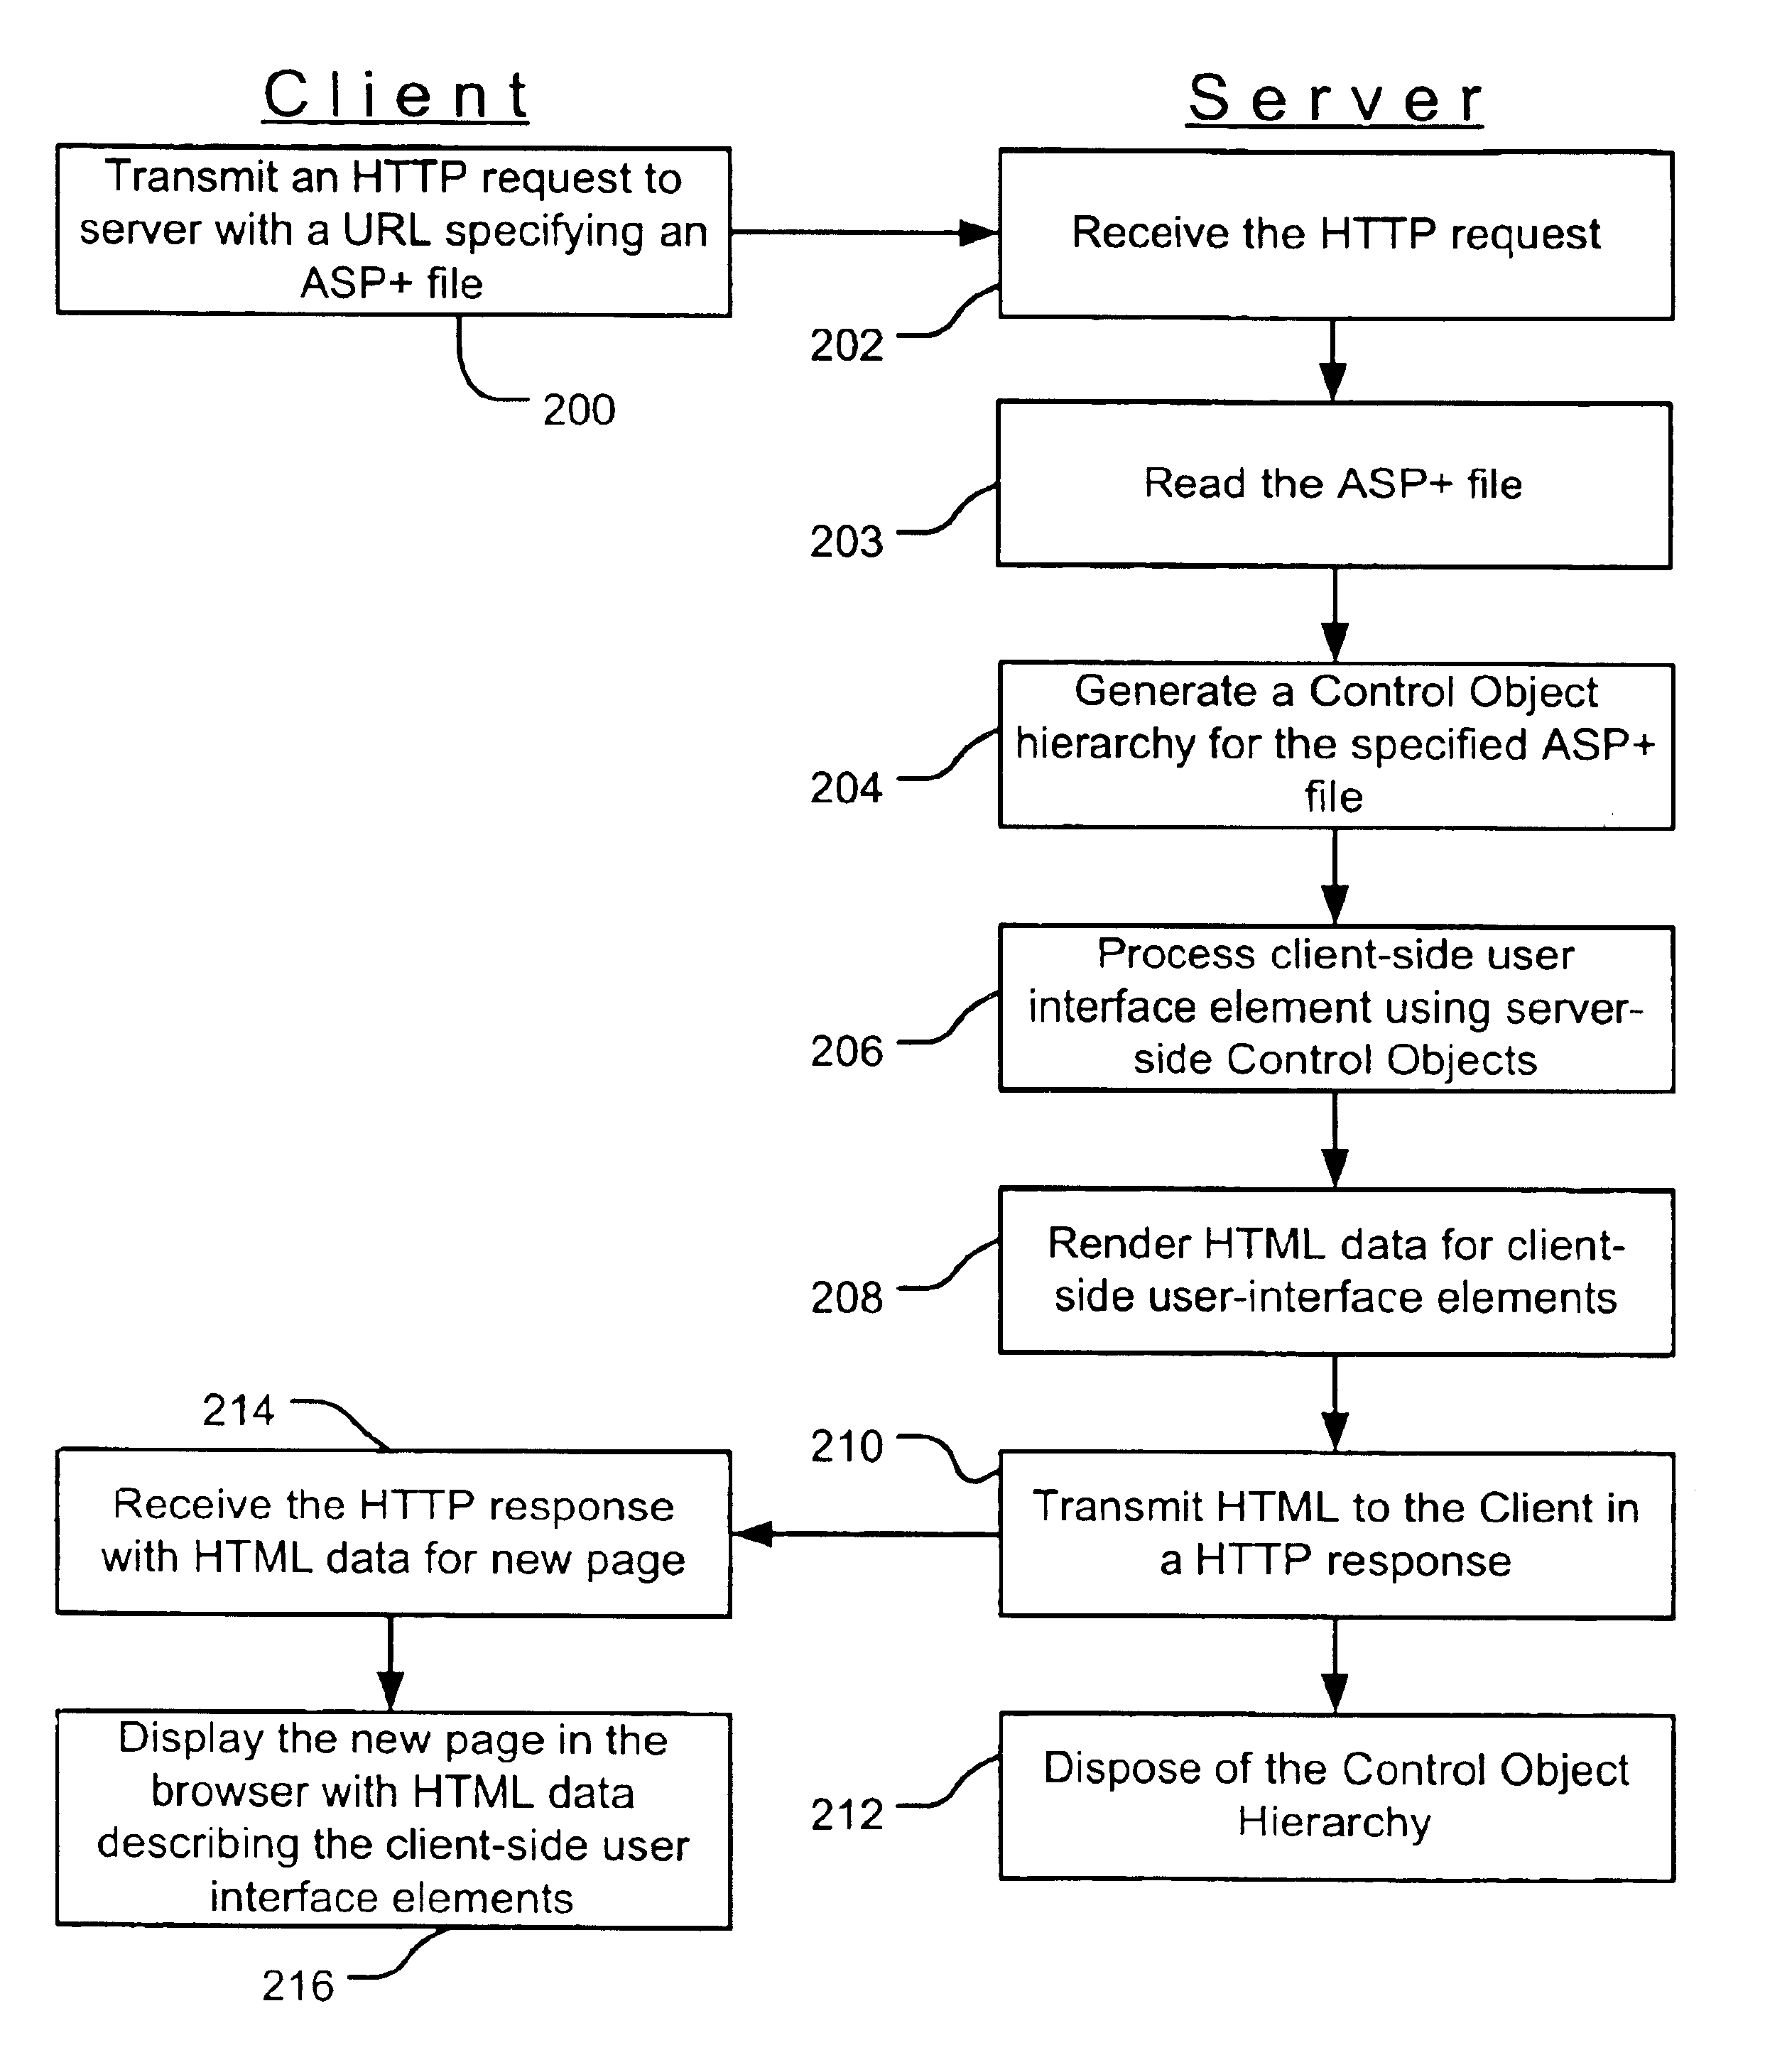 Server-side control objects for processing client-side user interface elements